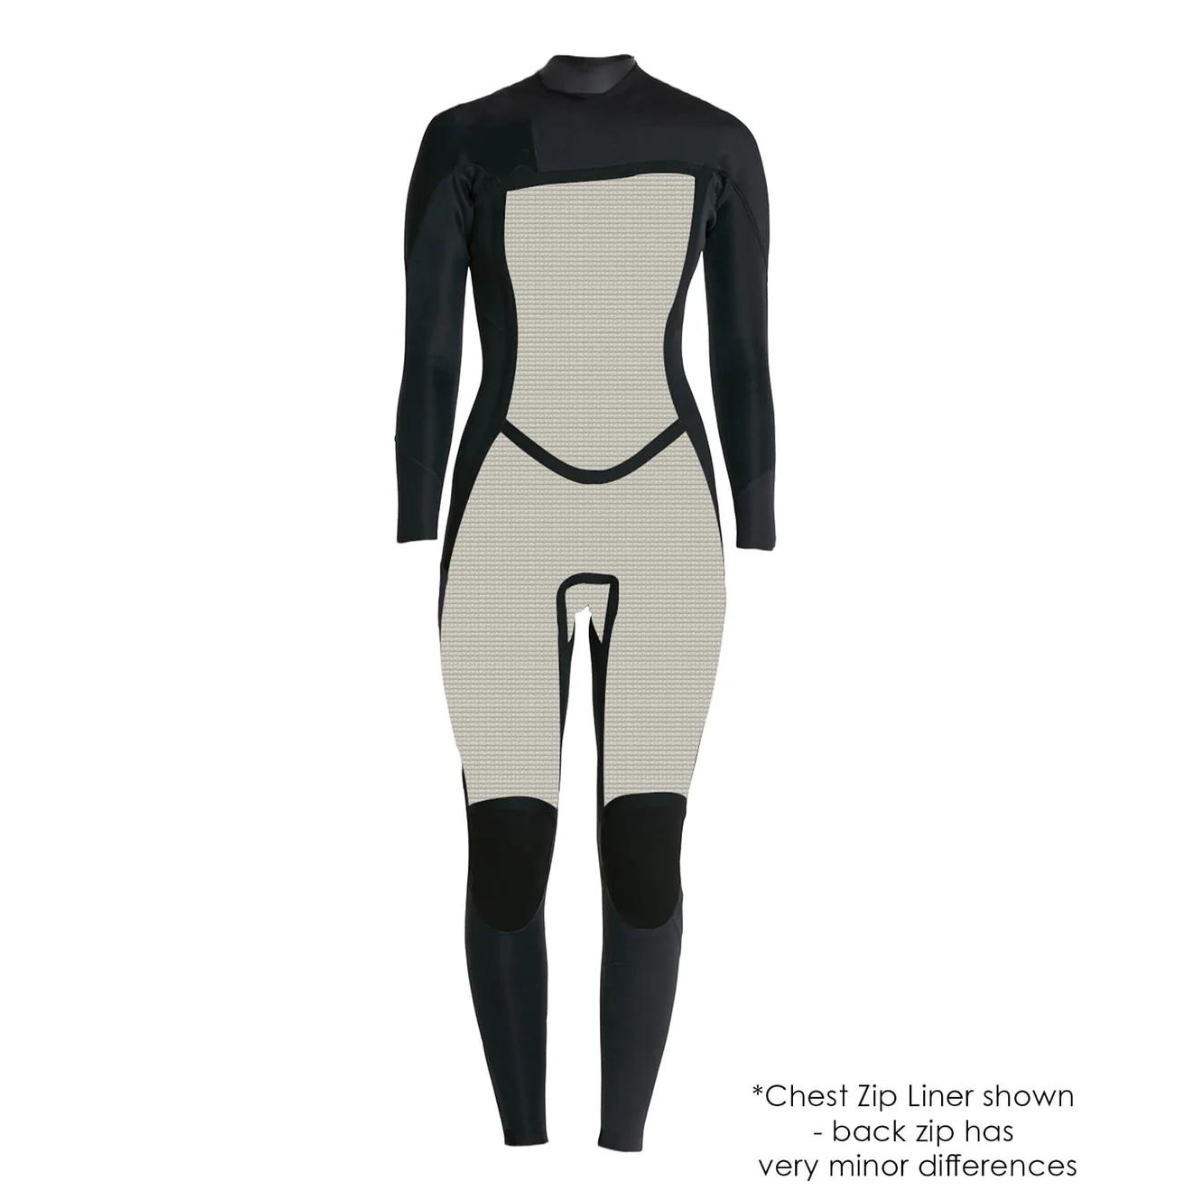 WETSUIT MUJER - LARGO - BAHIA BZ FULL 3/2MM - A05 BLK/BLK/BLK